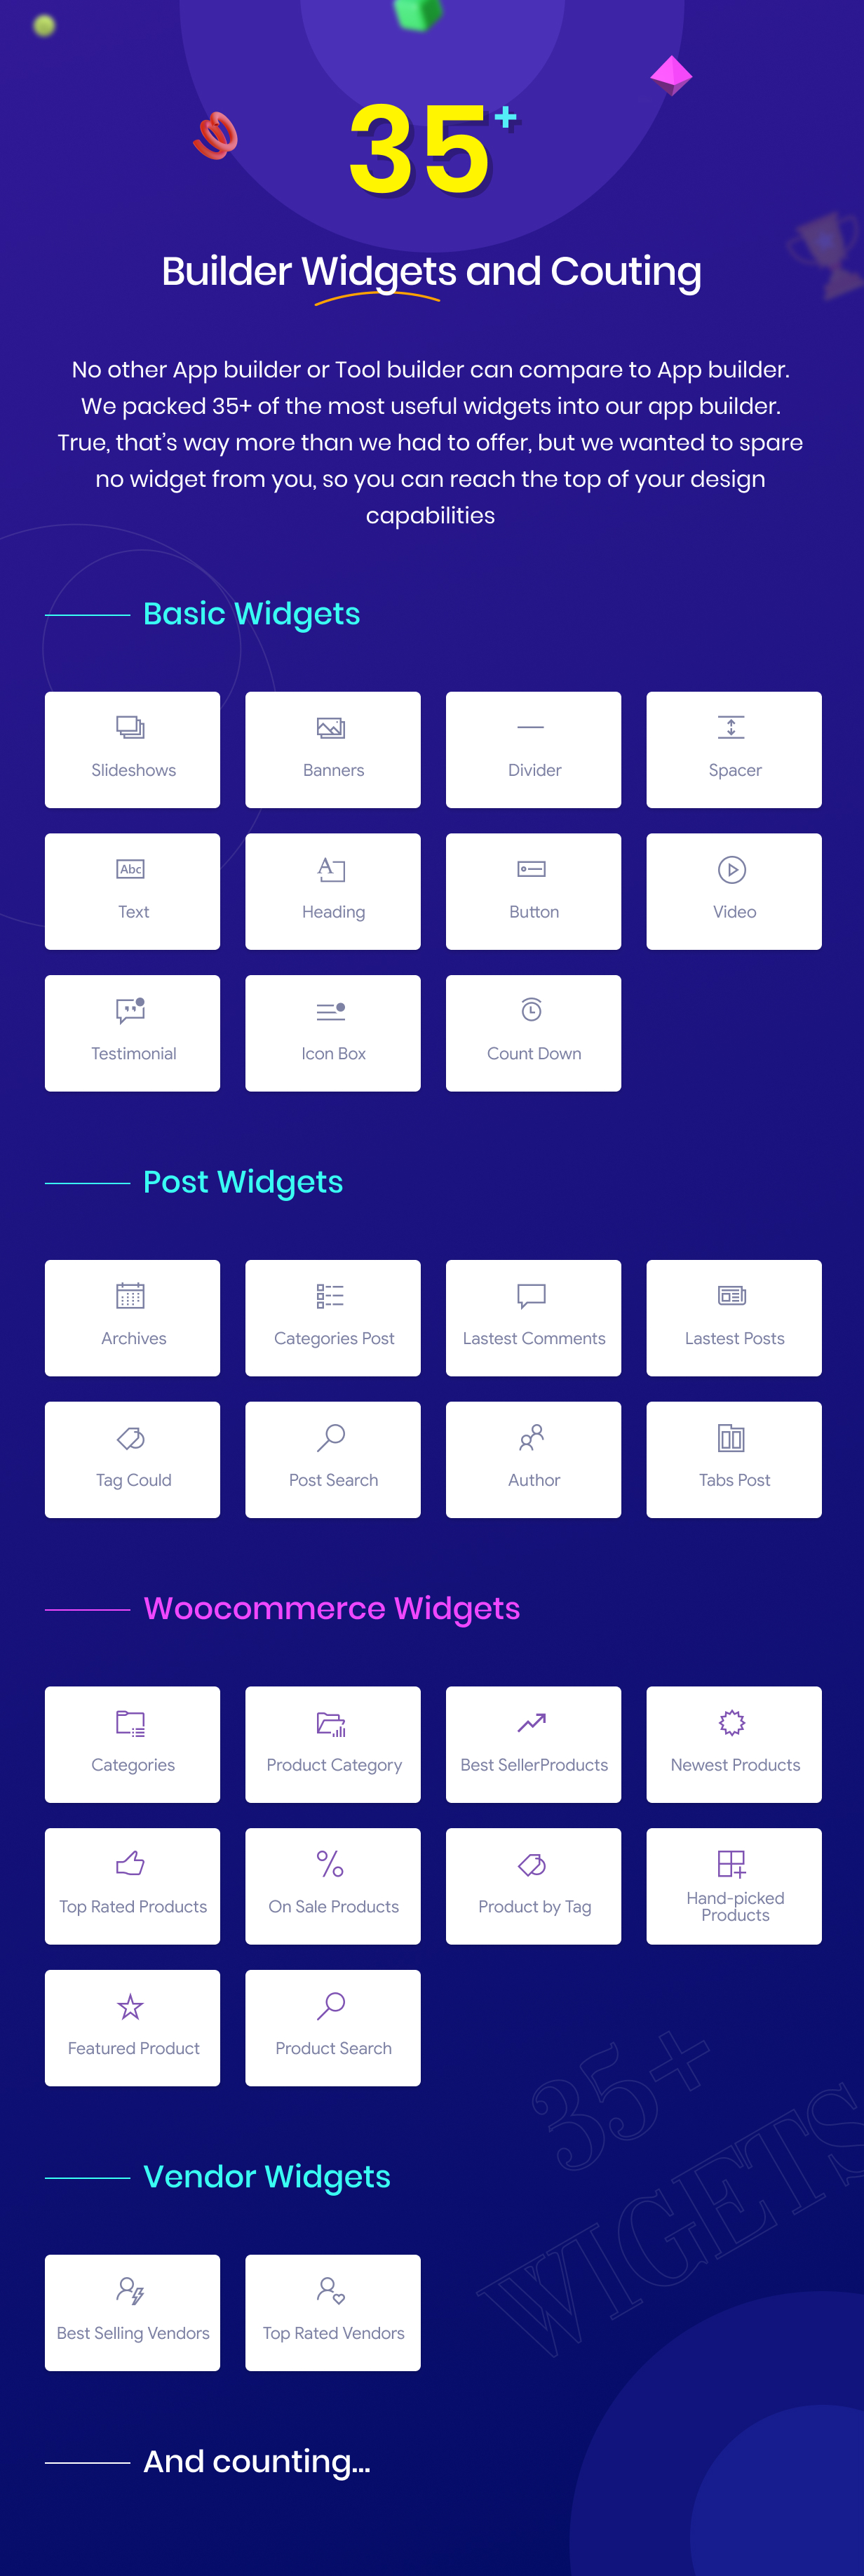 Builder Widgets and Couting